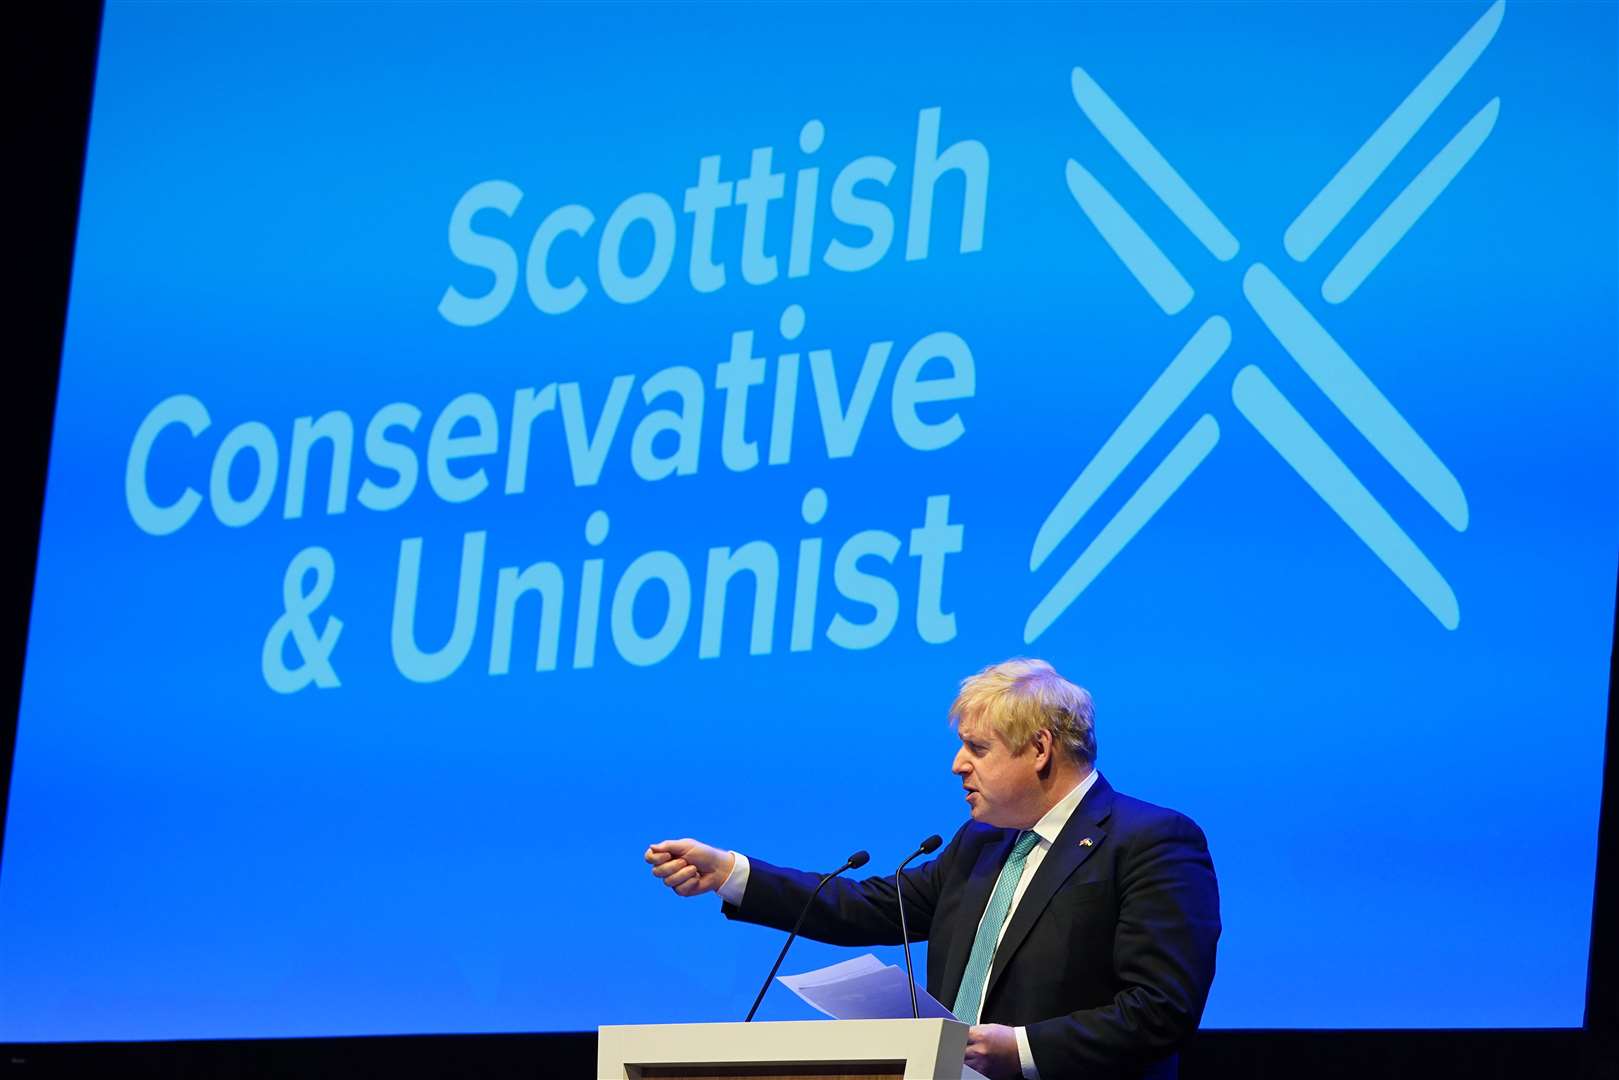 Boris Johnson speaking during the Scottish Conservative Conference in Aberdeen. (Andrew Milligan/PA)